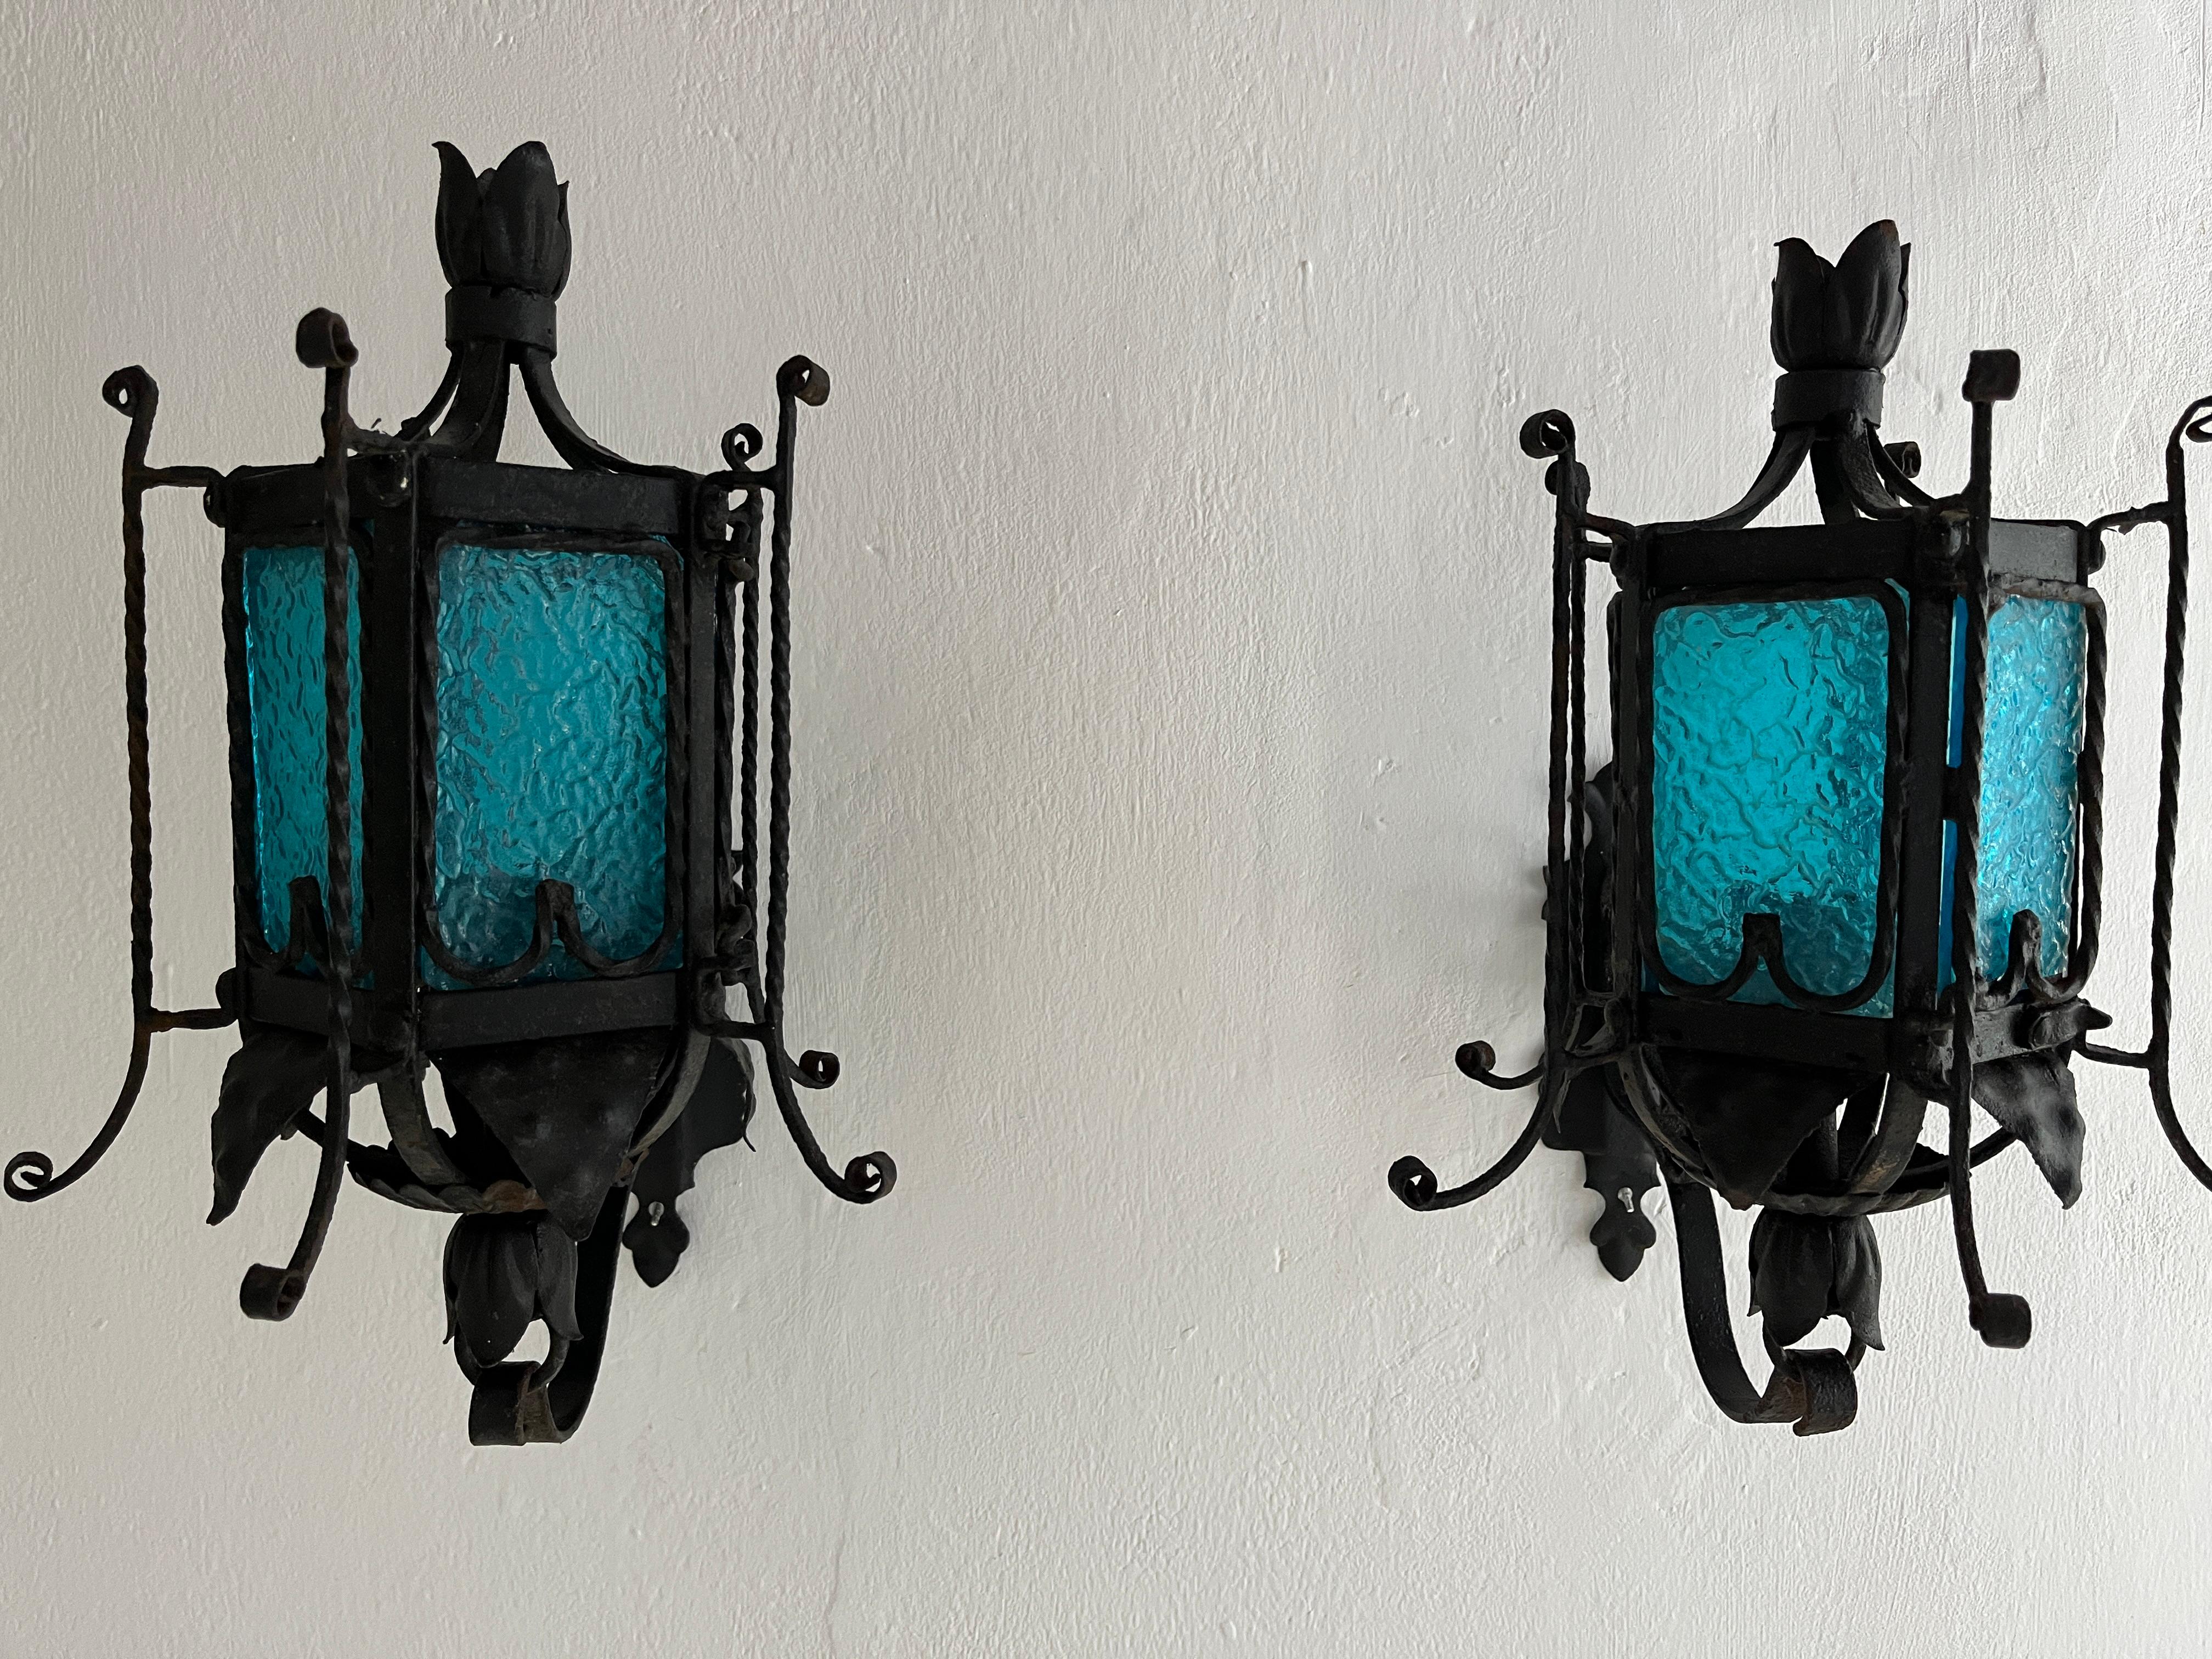 Housing one light each. Will be rewired with certified US UL sockets for the USA and appropriate sockets for all other countries and ready to hang. Rare aqua blue Murano glass lanterns or sconces with detailed wrought iron. All panes are in great